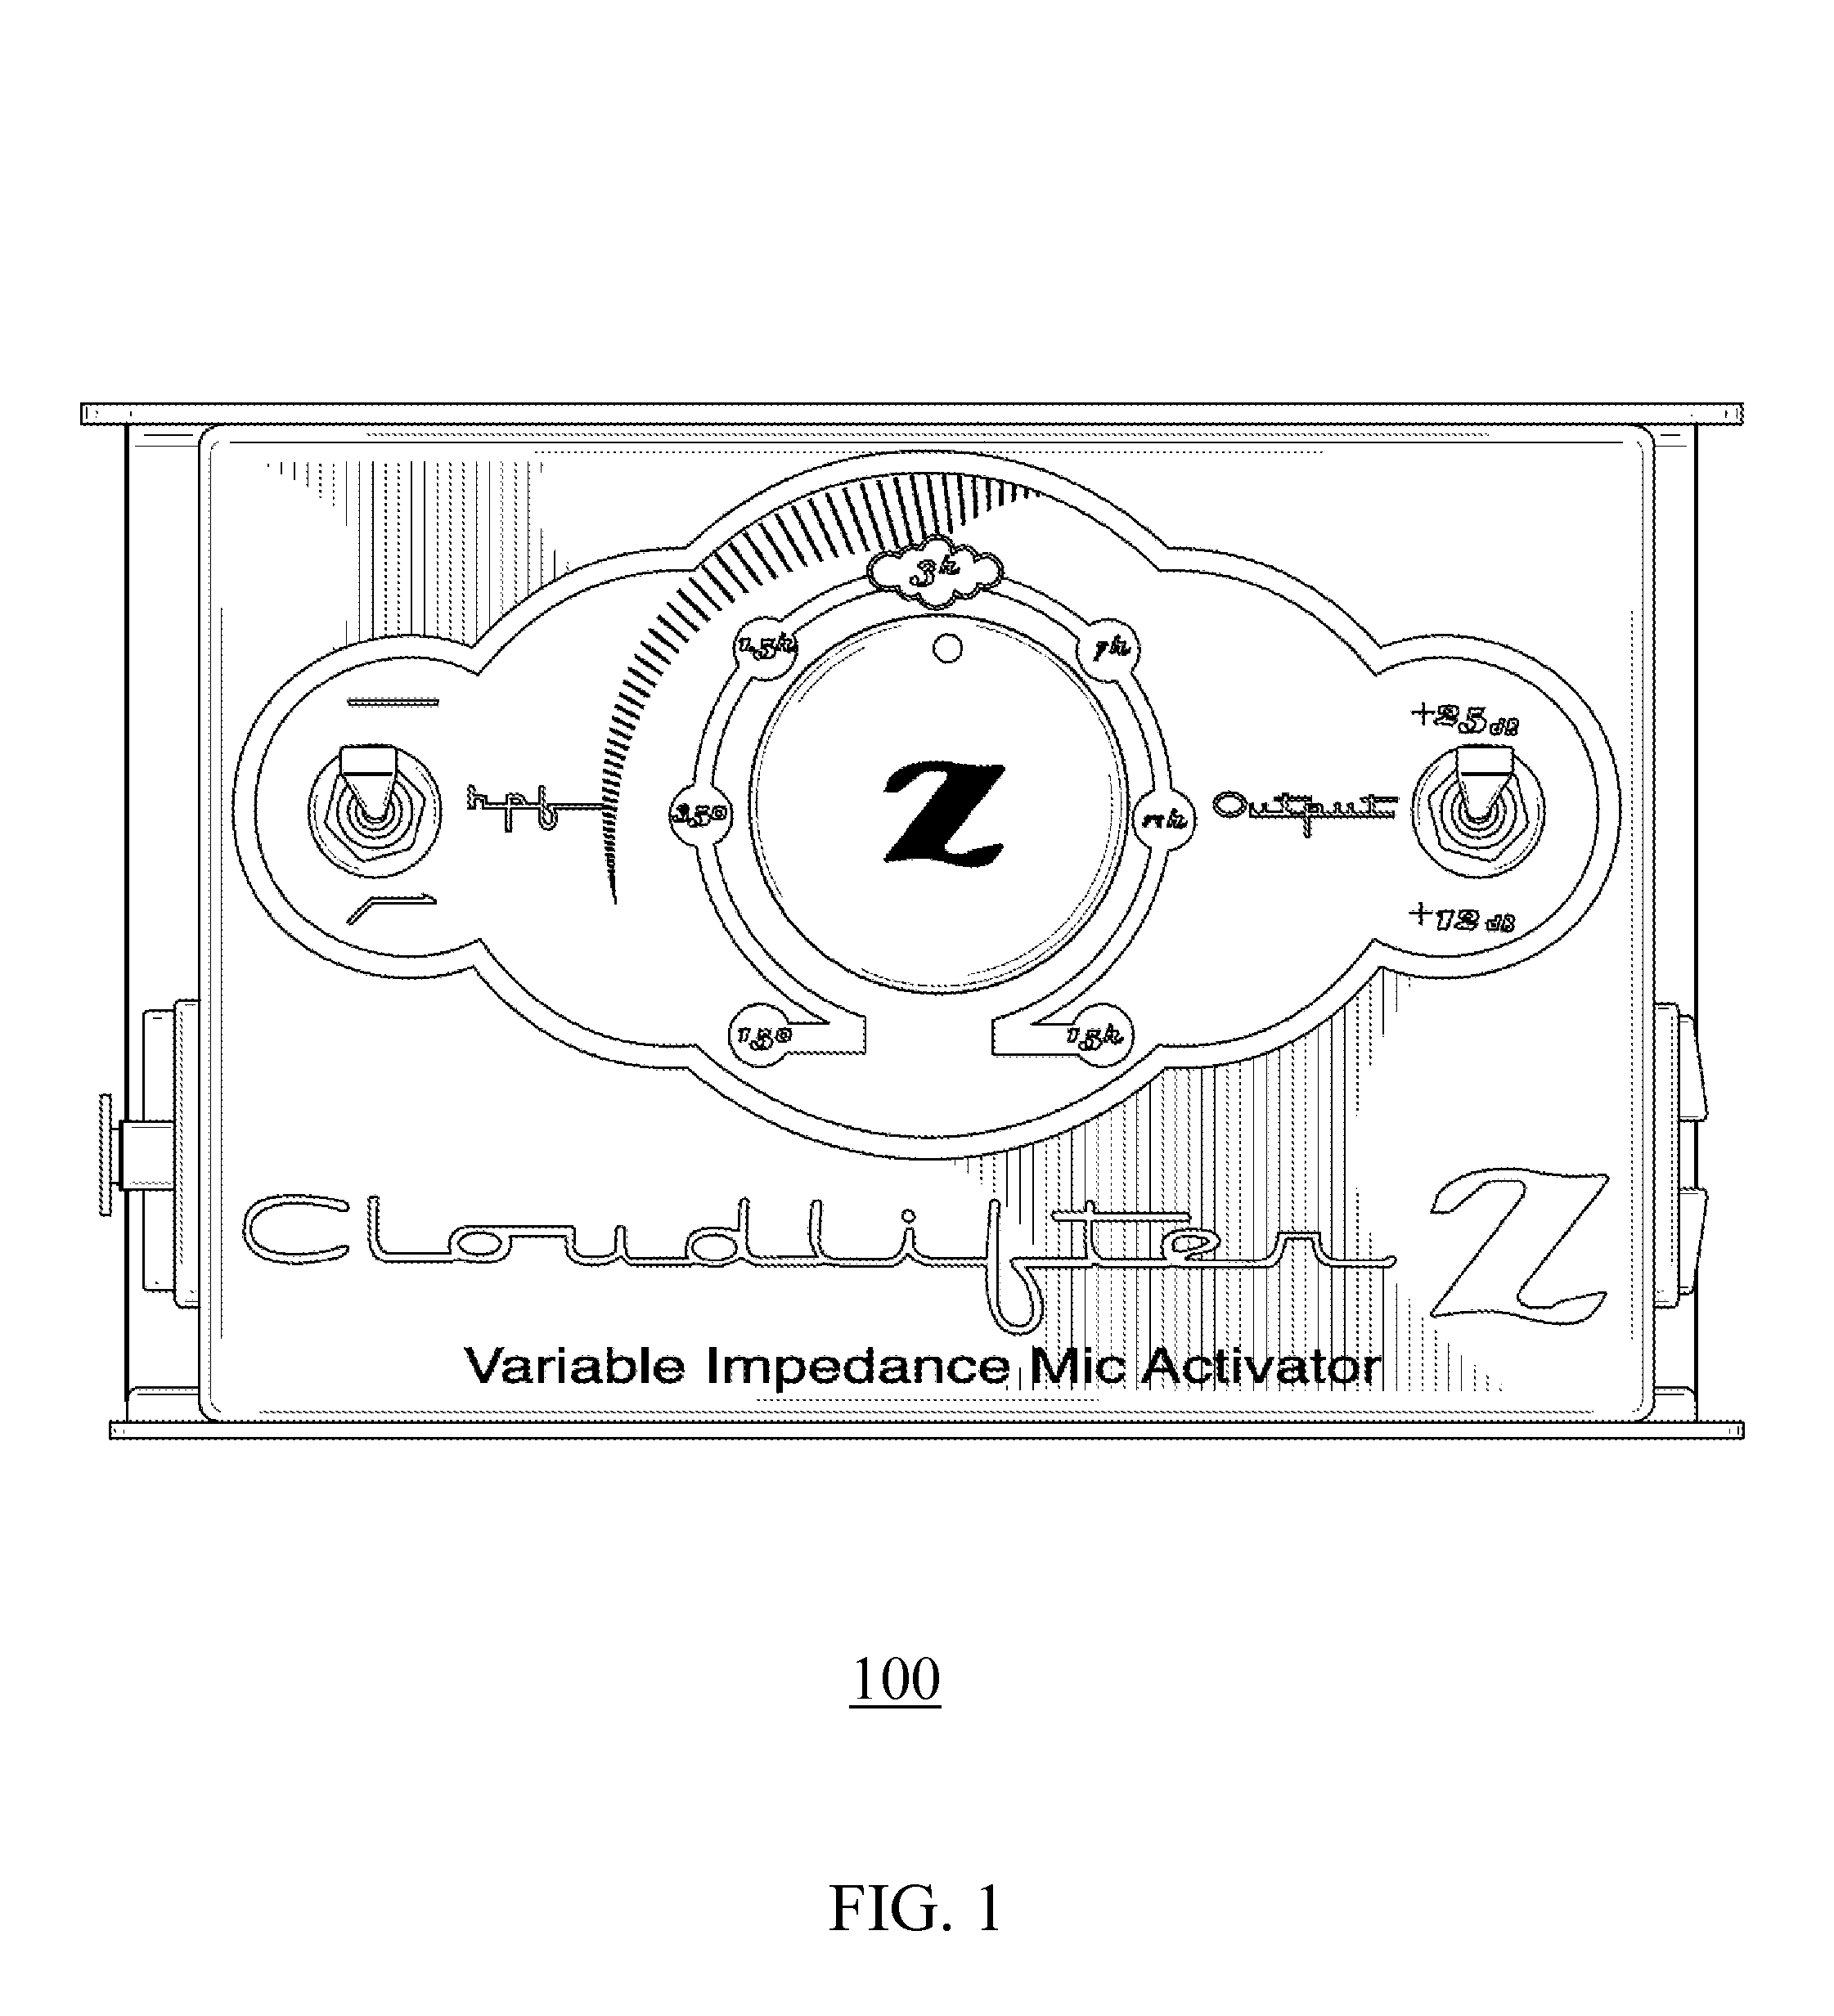 Active phantom-powered ribbon microphone with switchable proximity effect response filtering for voice and music applications